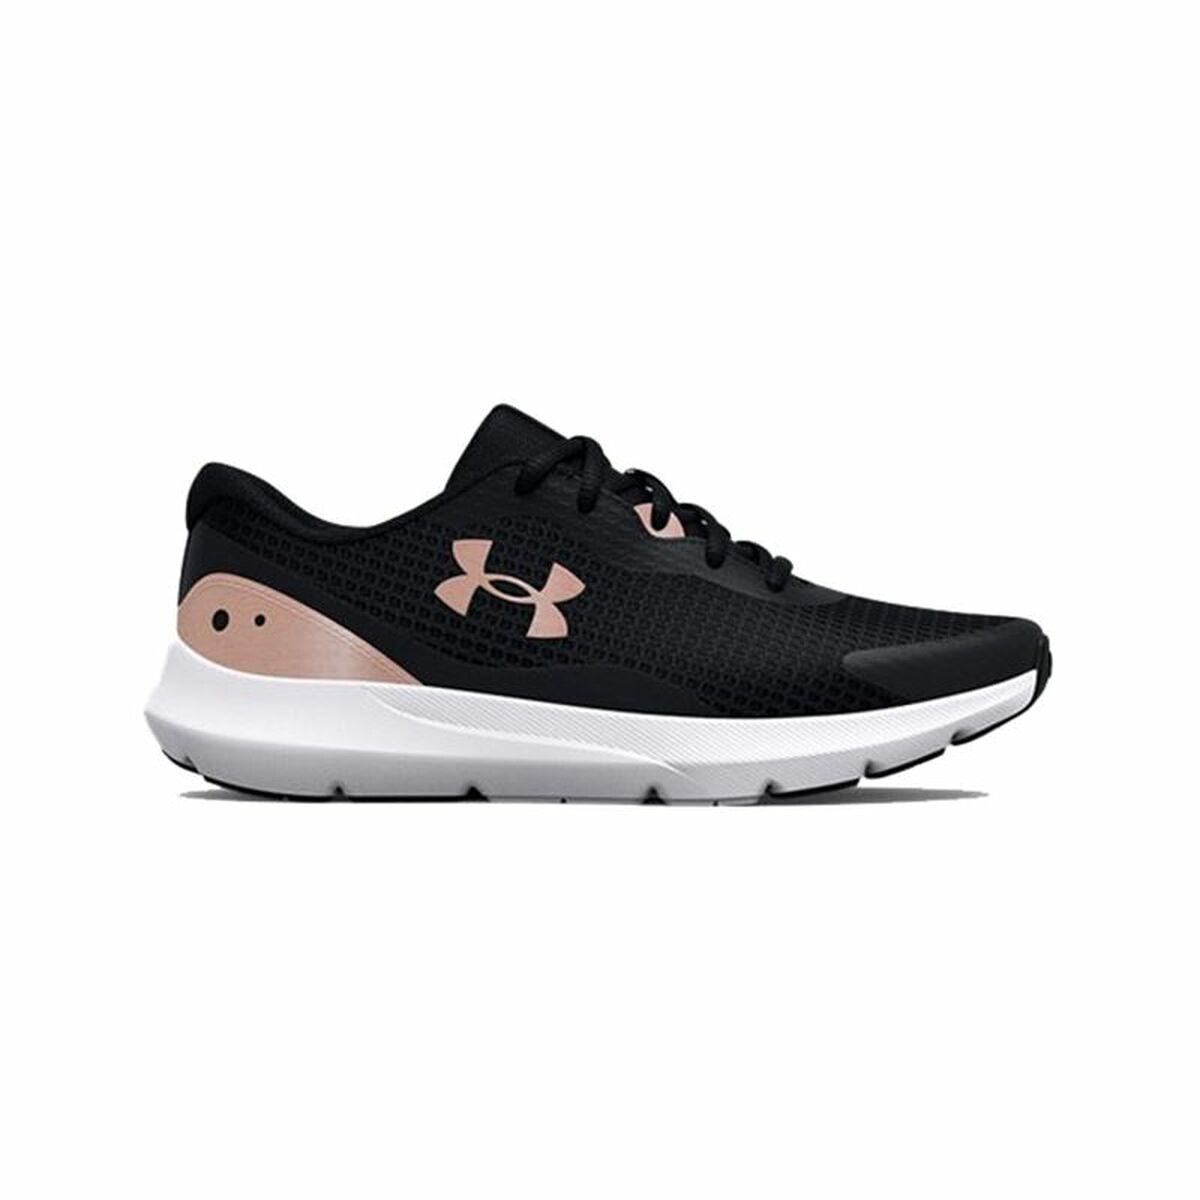 Under Armour Sports Trainers For Women Surge 3 Grey Black | Lyst